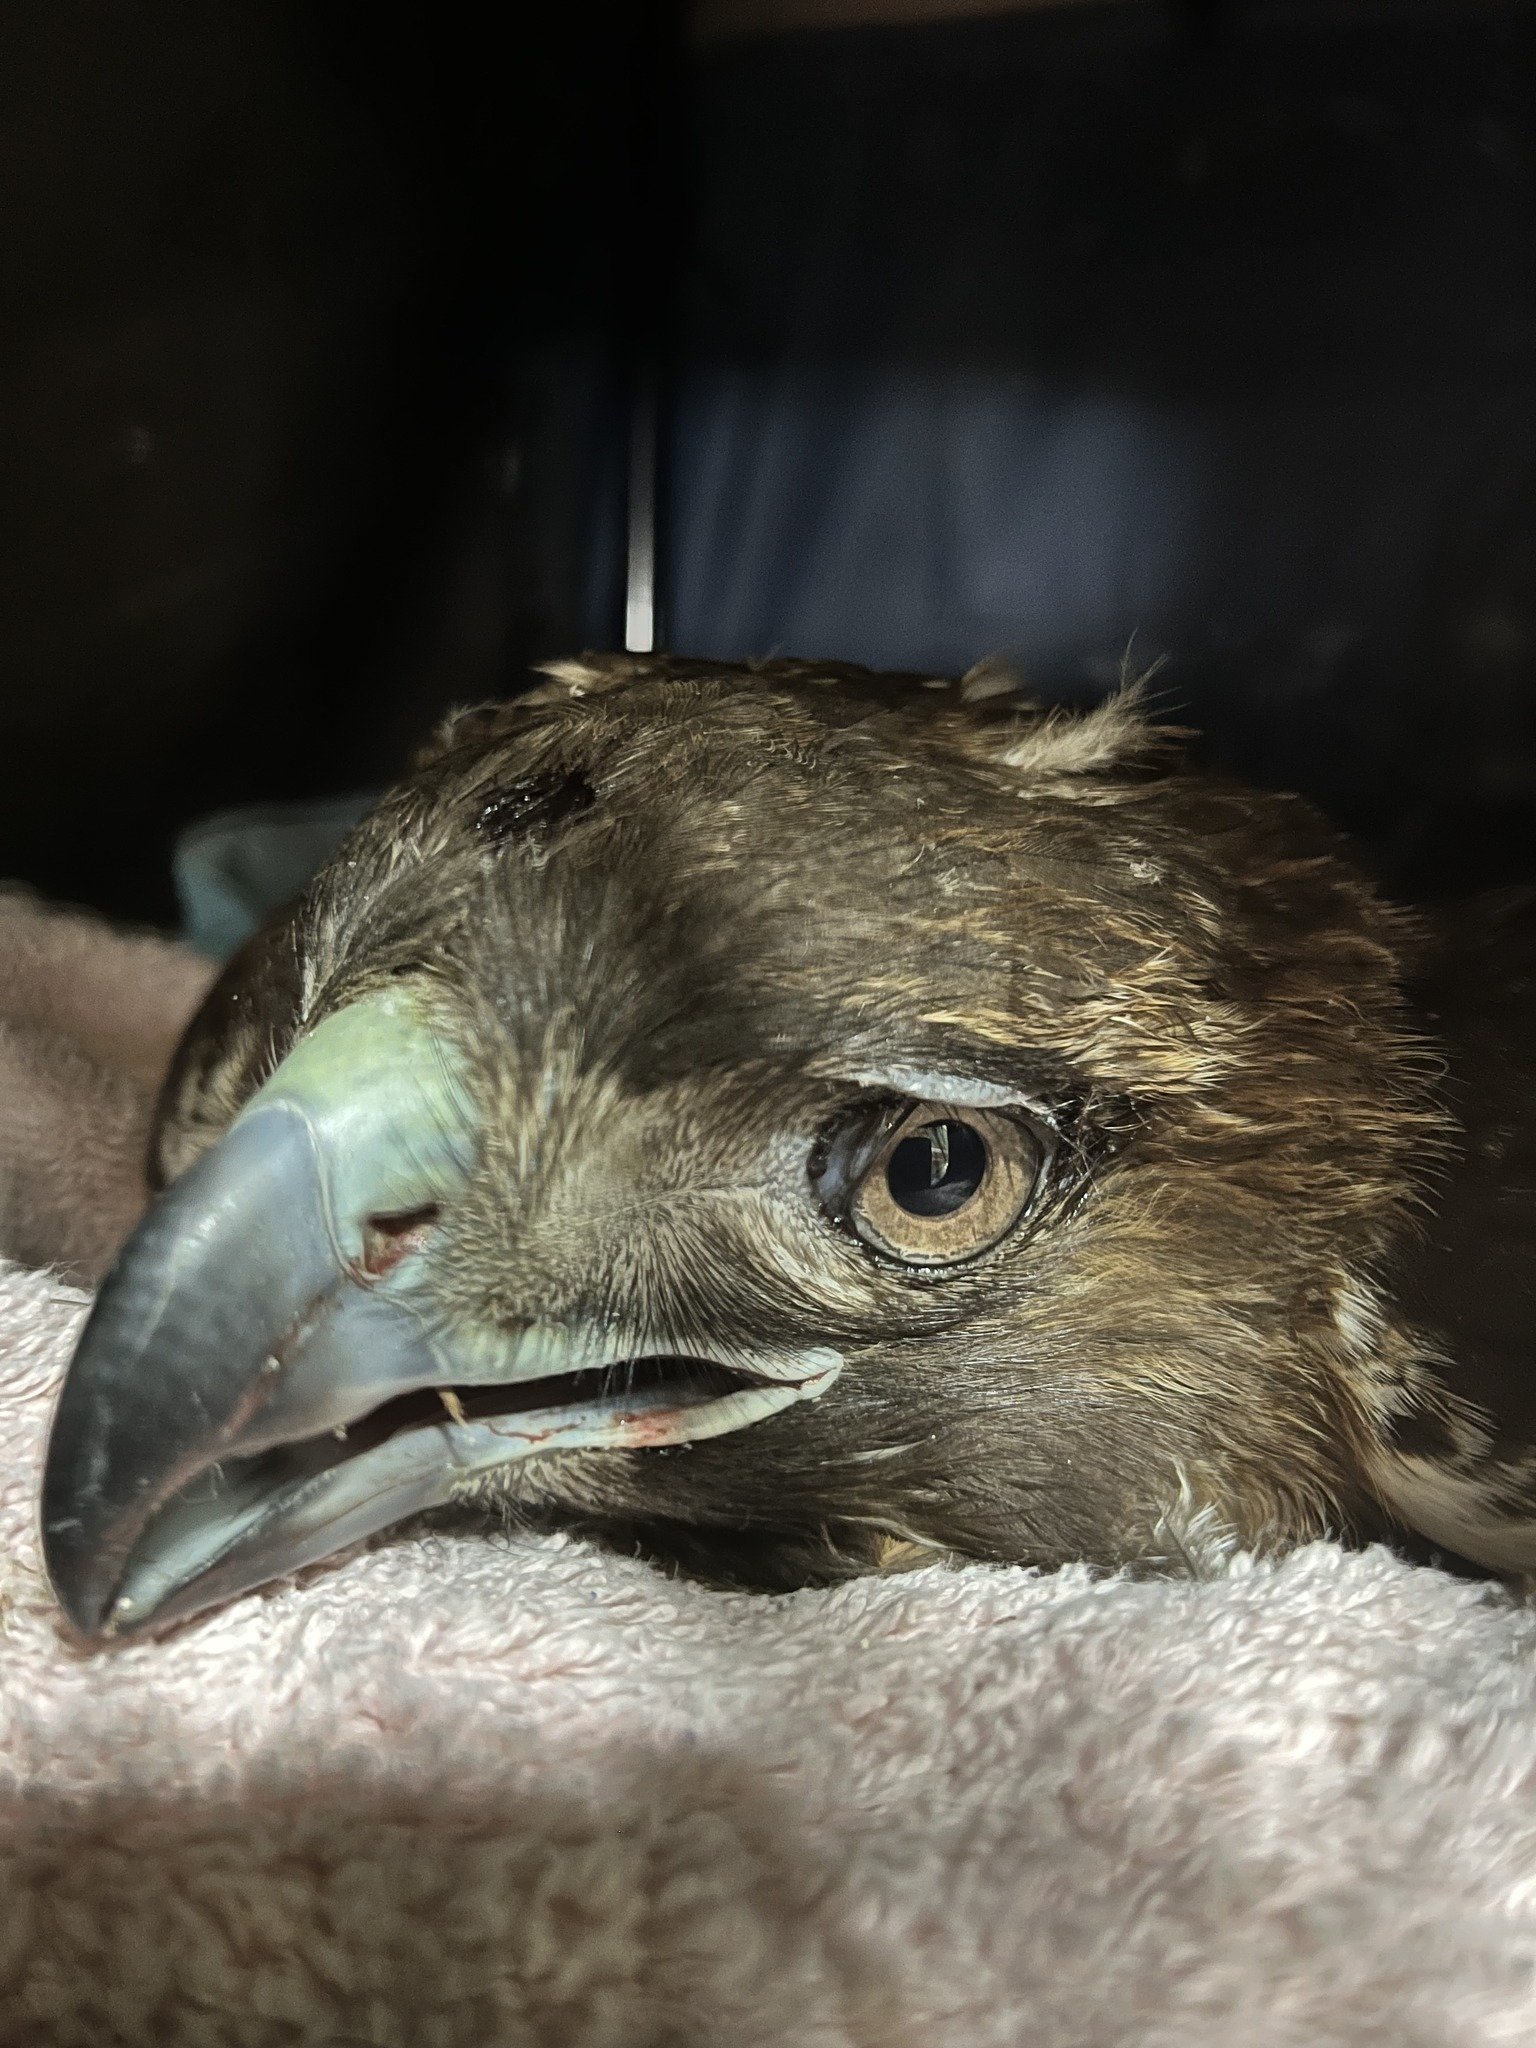 Rat poison kills eagles, hawks and pets may be banned in CT